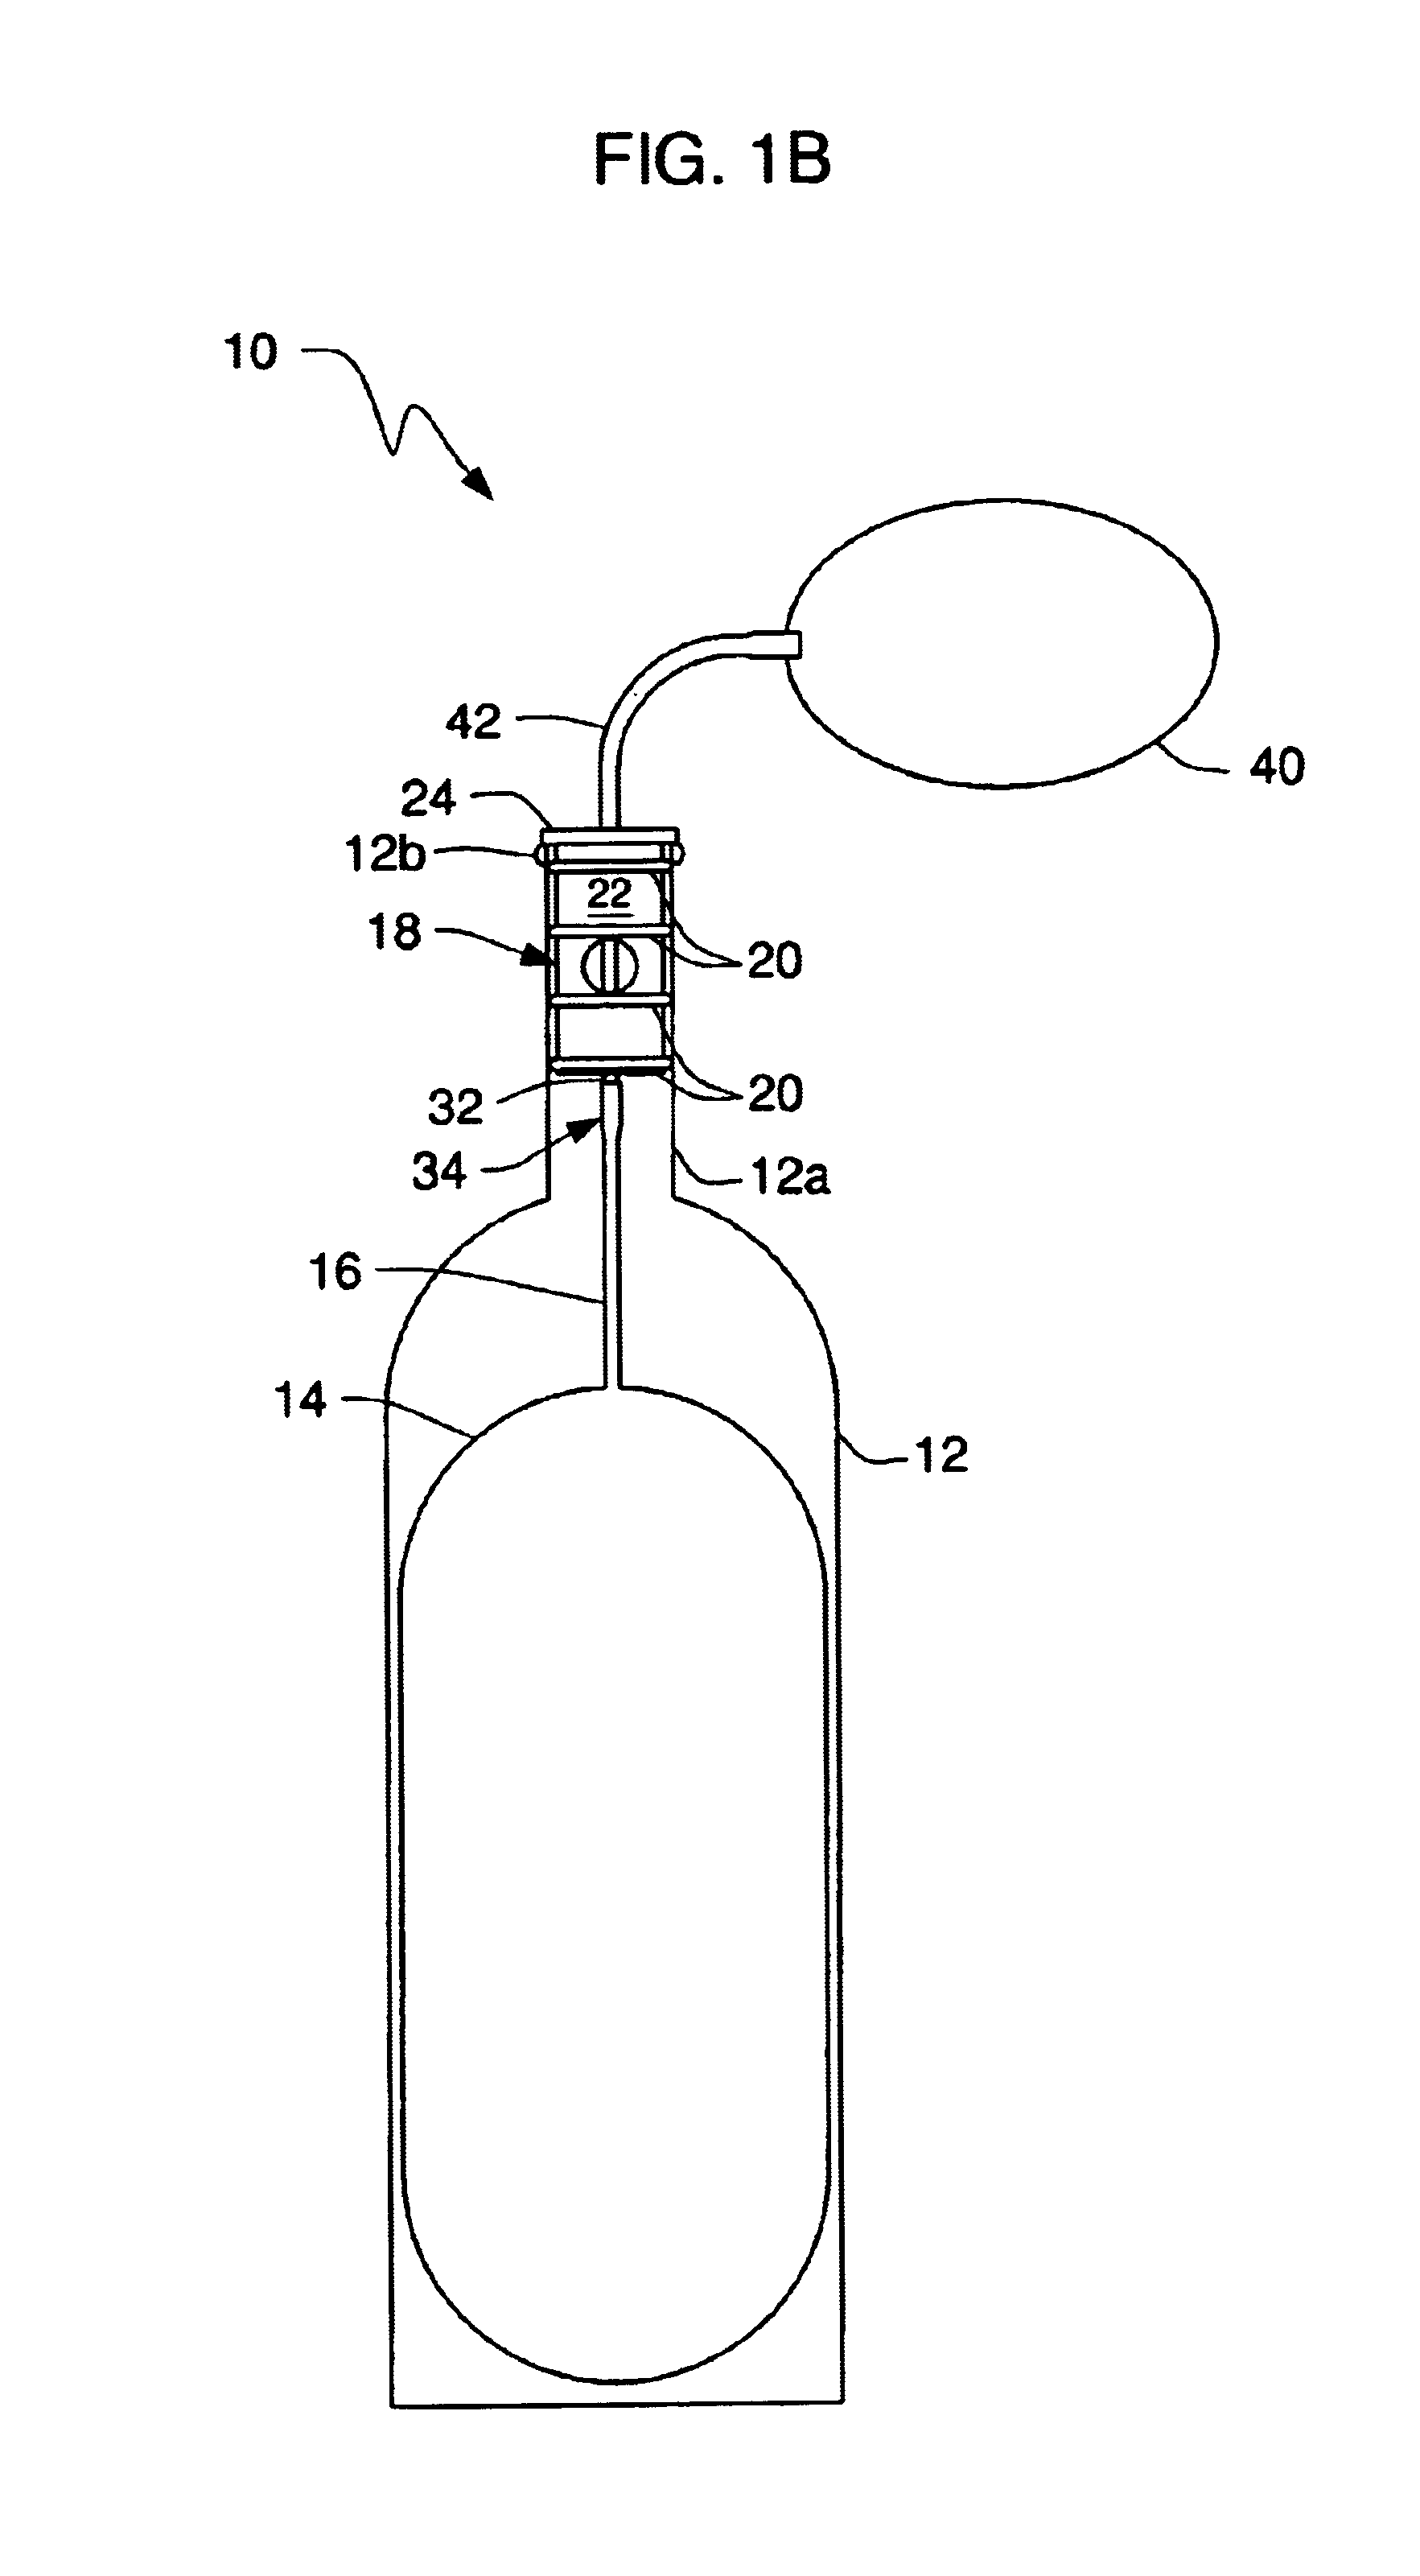 Air barrier device for protecting liquid fluids in opened containers